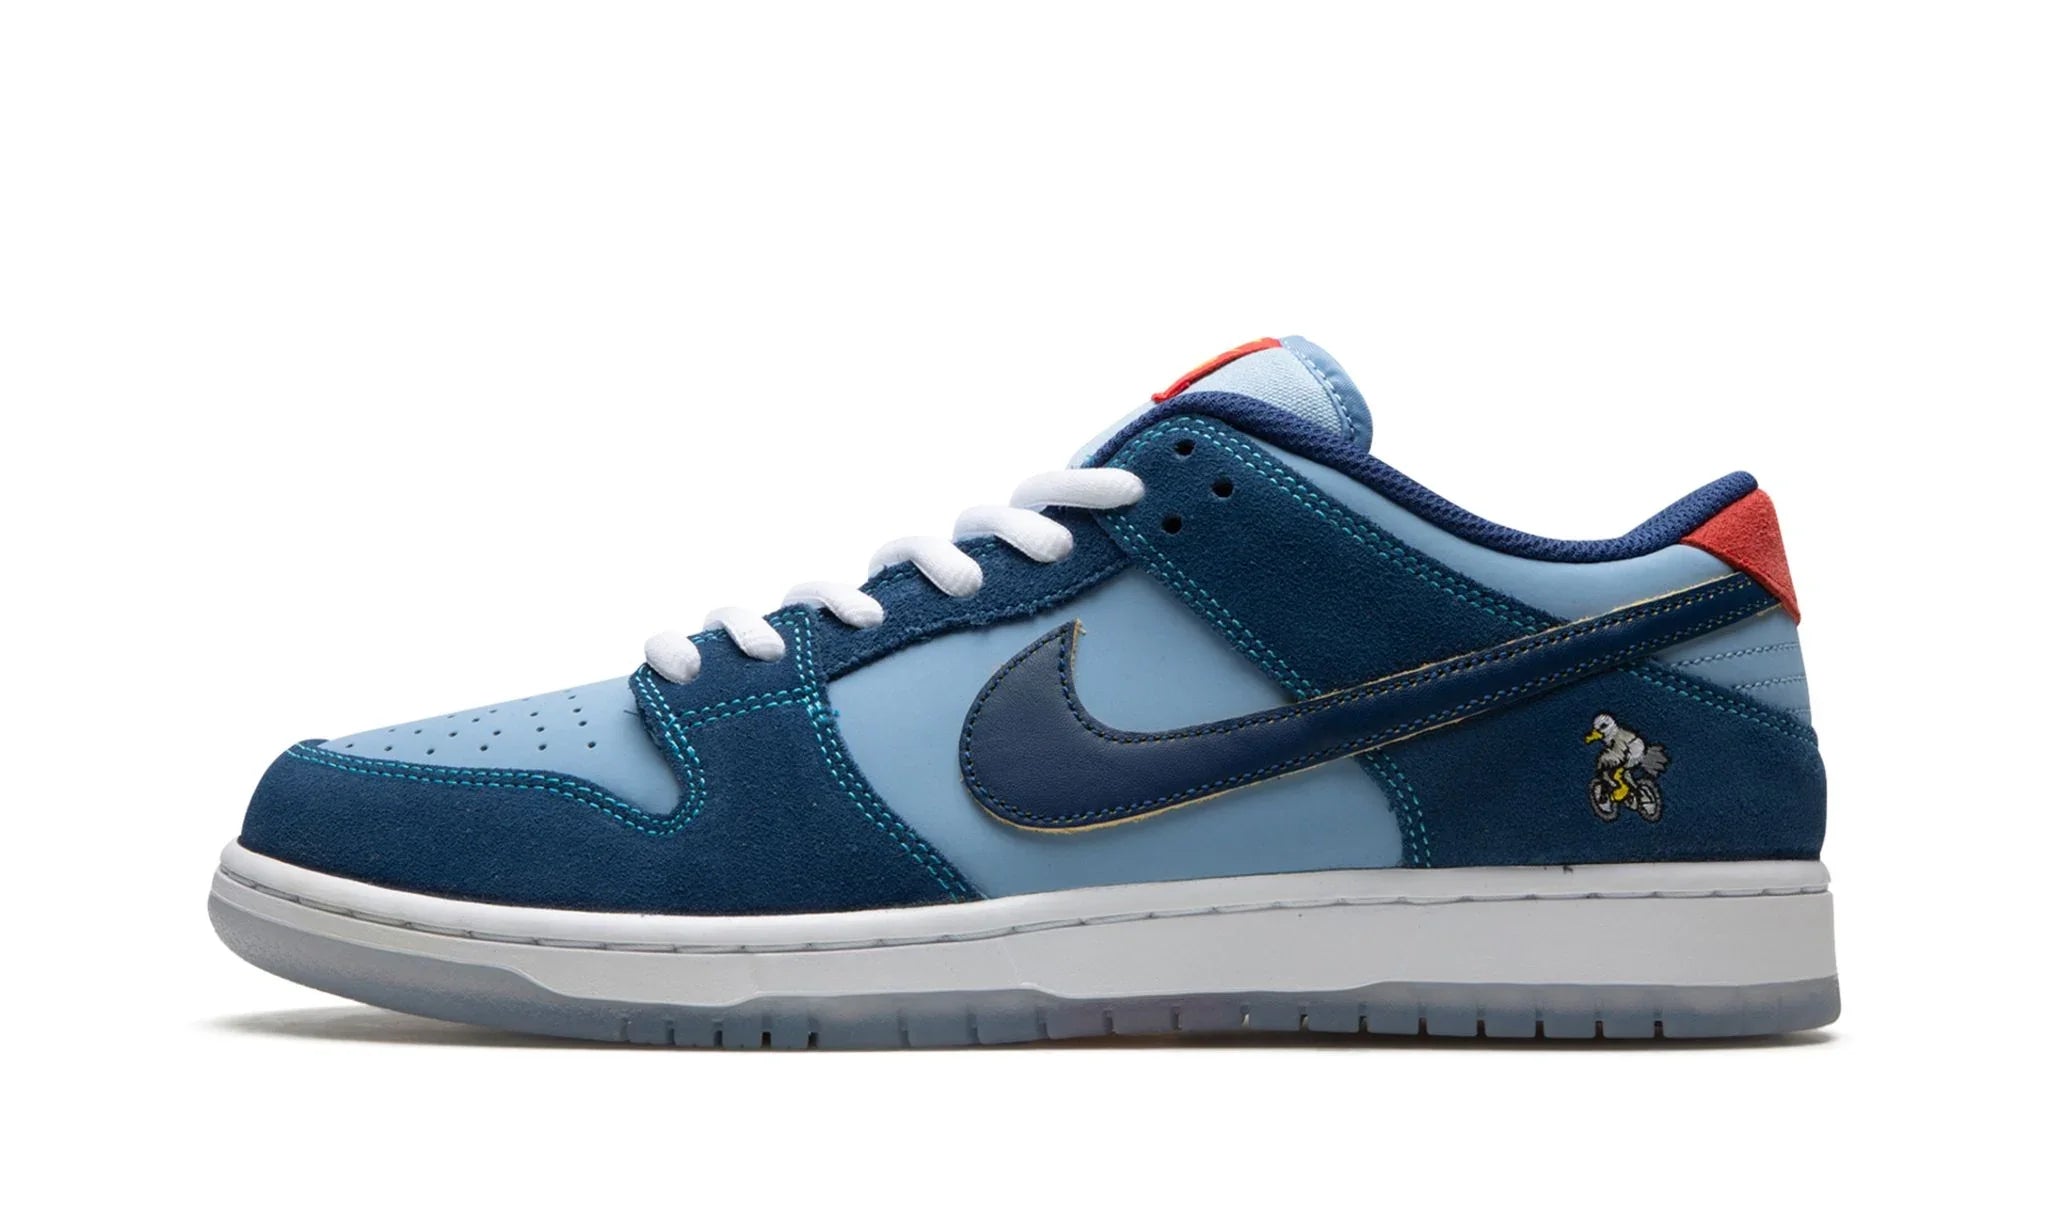 Nike Dunk Low SB PRM "Why So Sad ?" - DX5549-400 - Sneakers